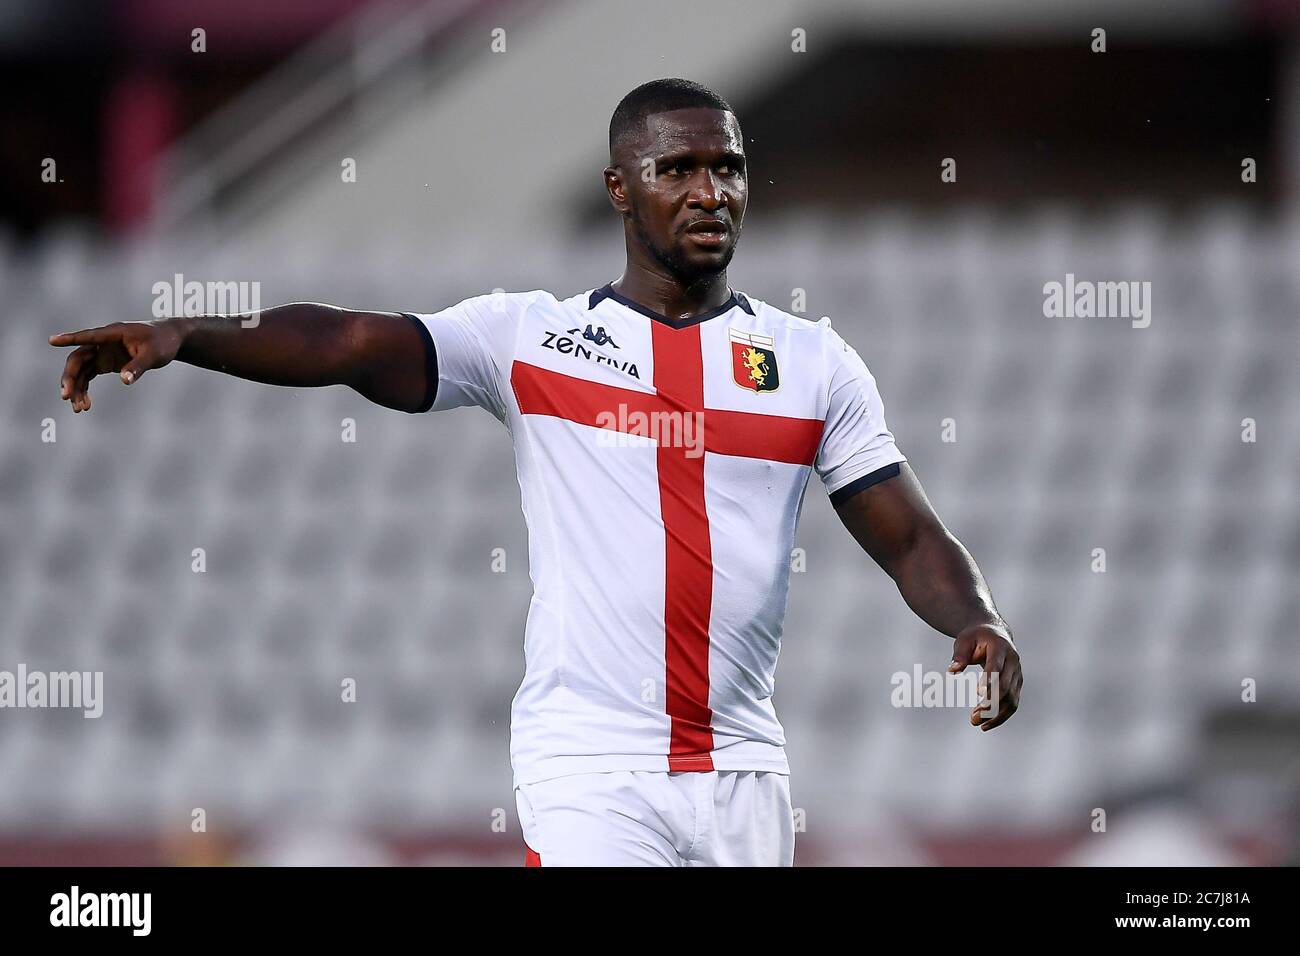 Turin, Italy - 16 July, 2020: Cristian Zapata of Genoa CFC gestures during the Serie A football match between Torino FC and Genoa CFC. Torino FC won 3-0 over Genoa CFC. Credit: Nicolò Campo/Alamy Live News Stock Photo